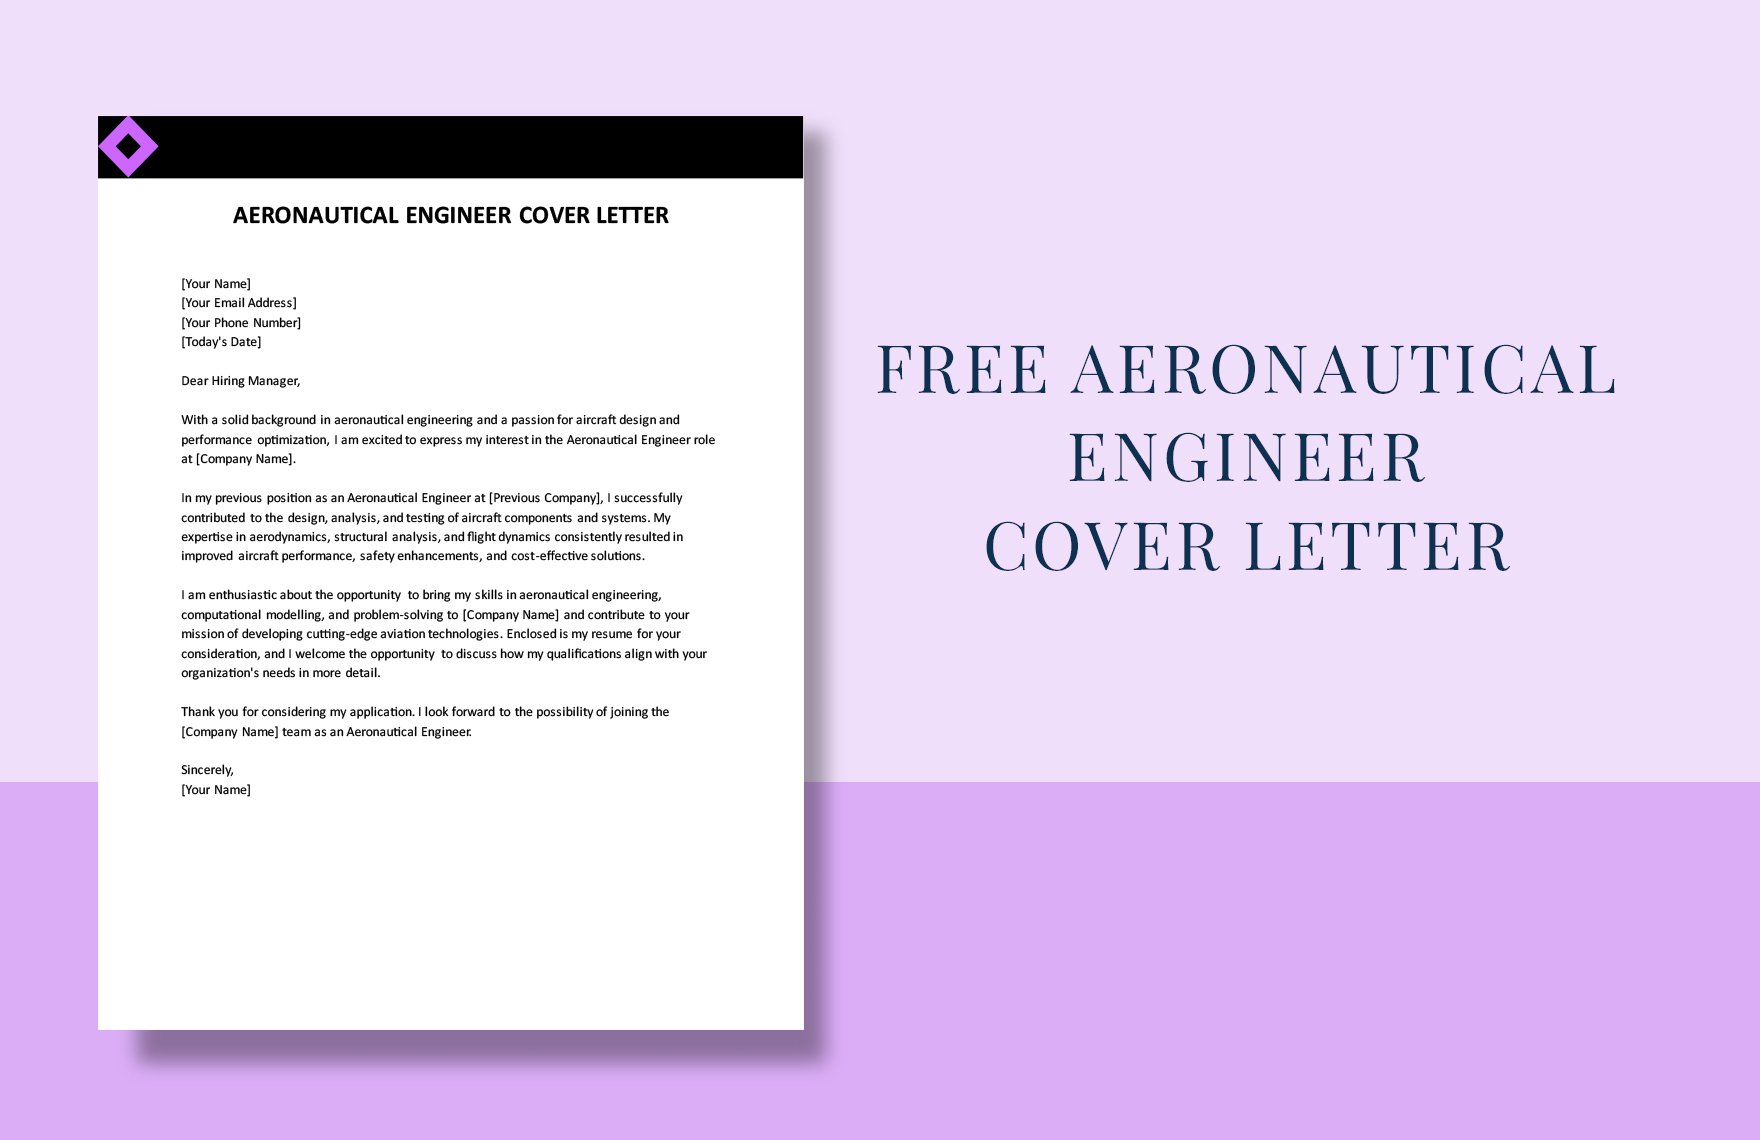 Aeronautical Engineer Cover Letter in Word, Google Docs, PDF